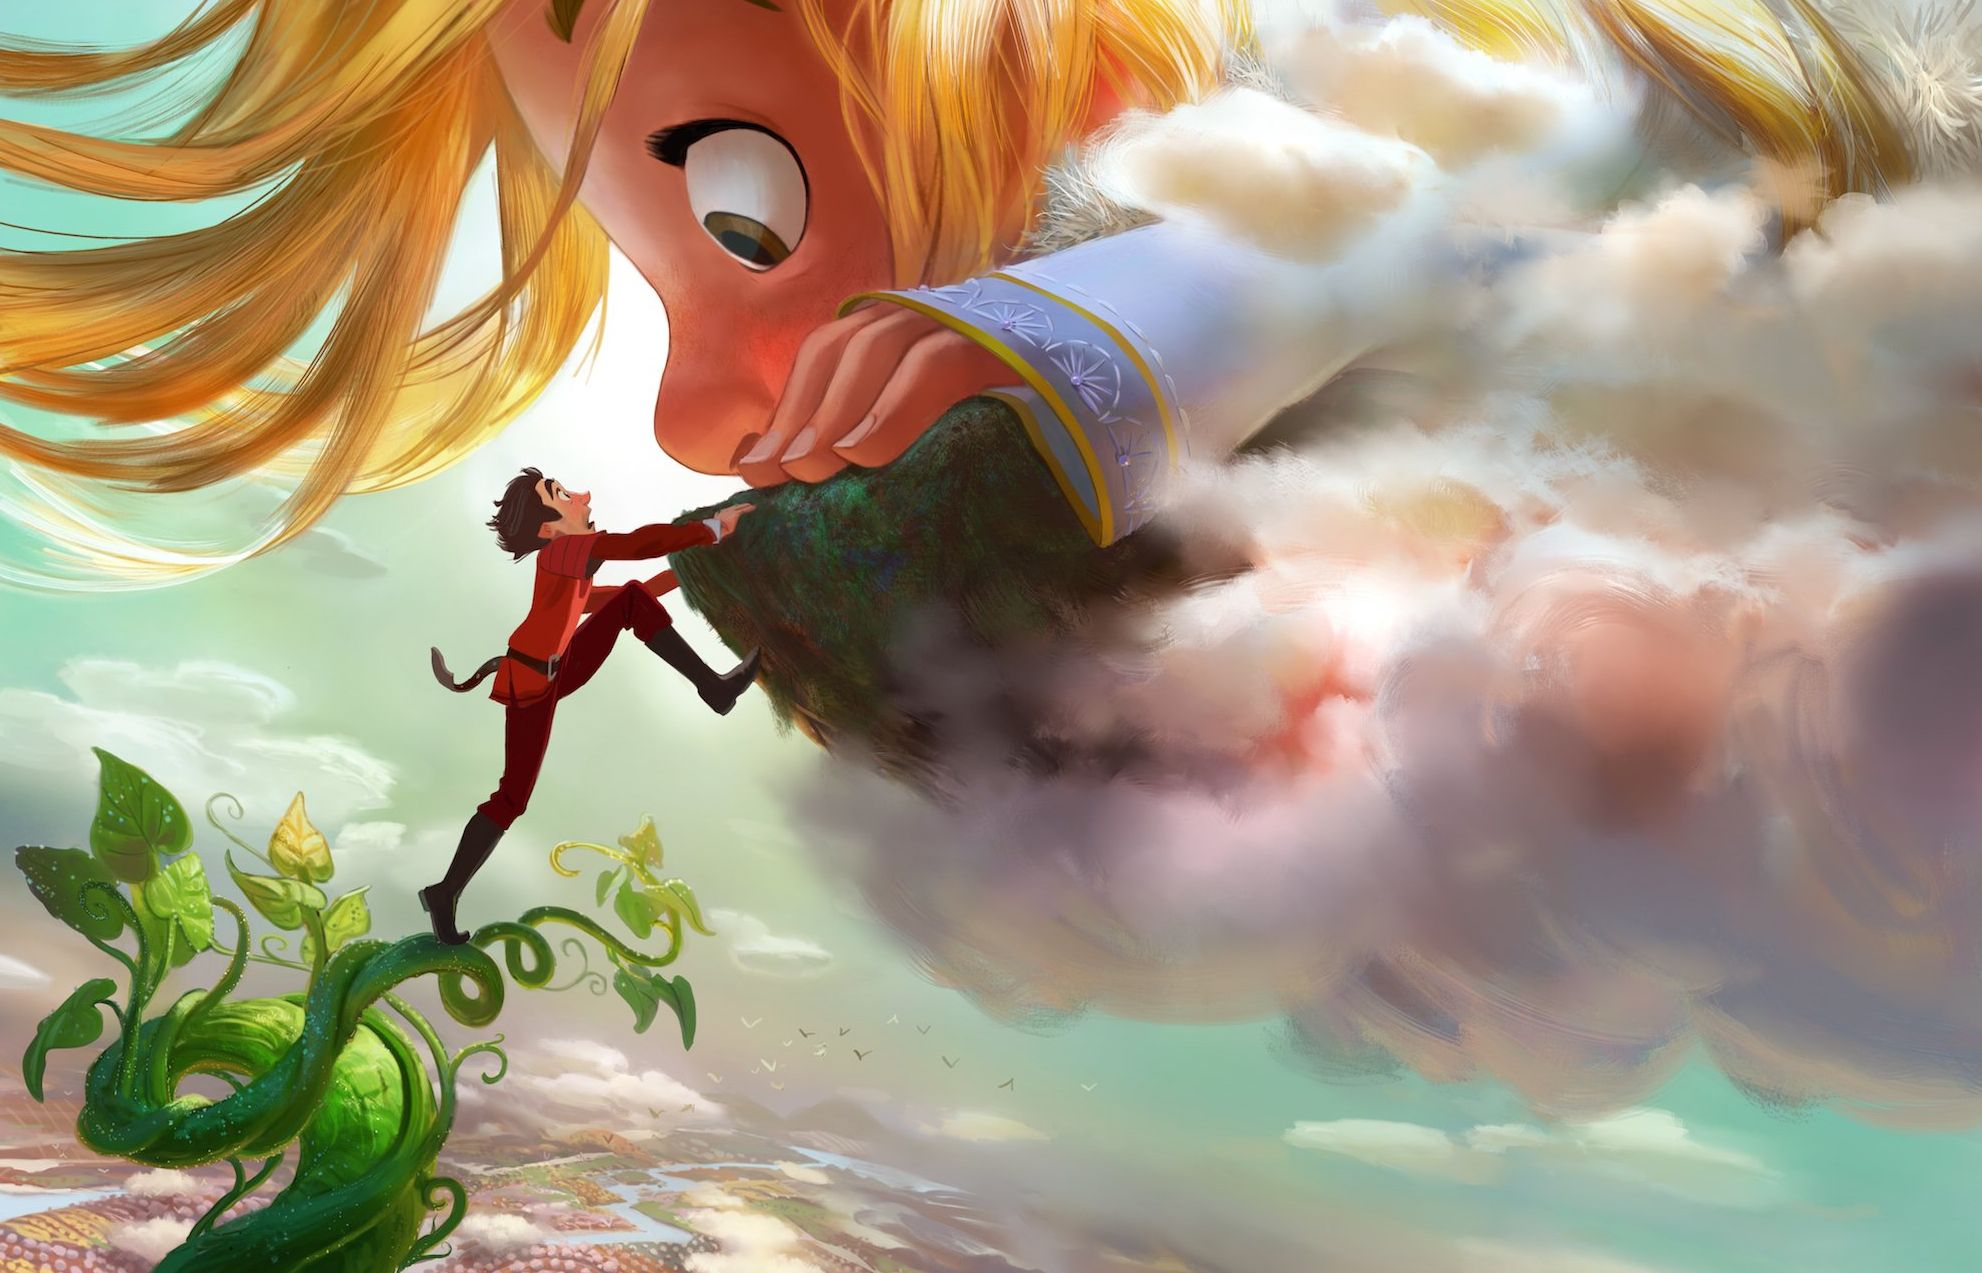 At Disney's D23 Expo a new take on "Jack in the Beanstalk" w